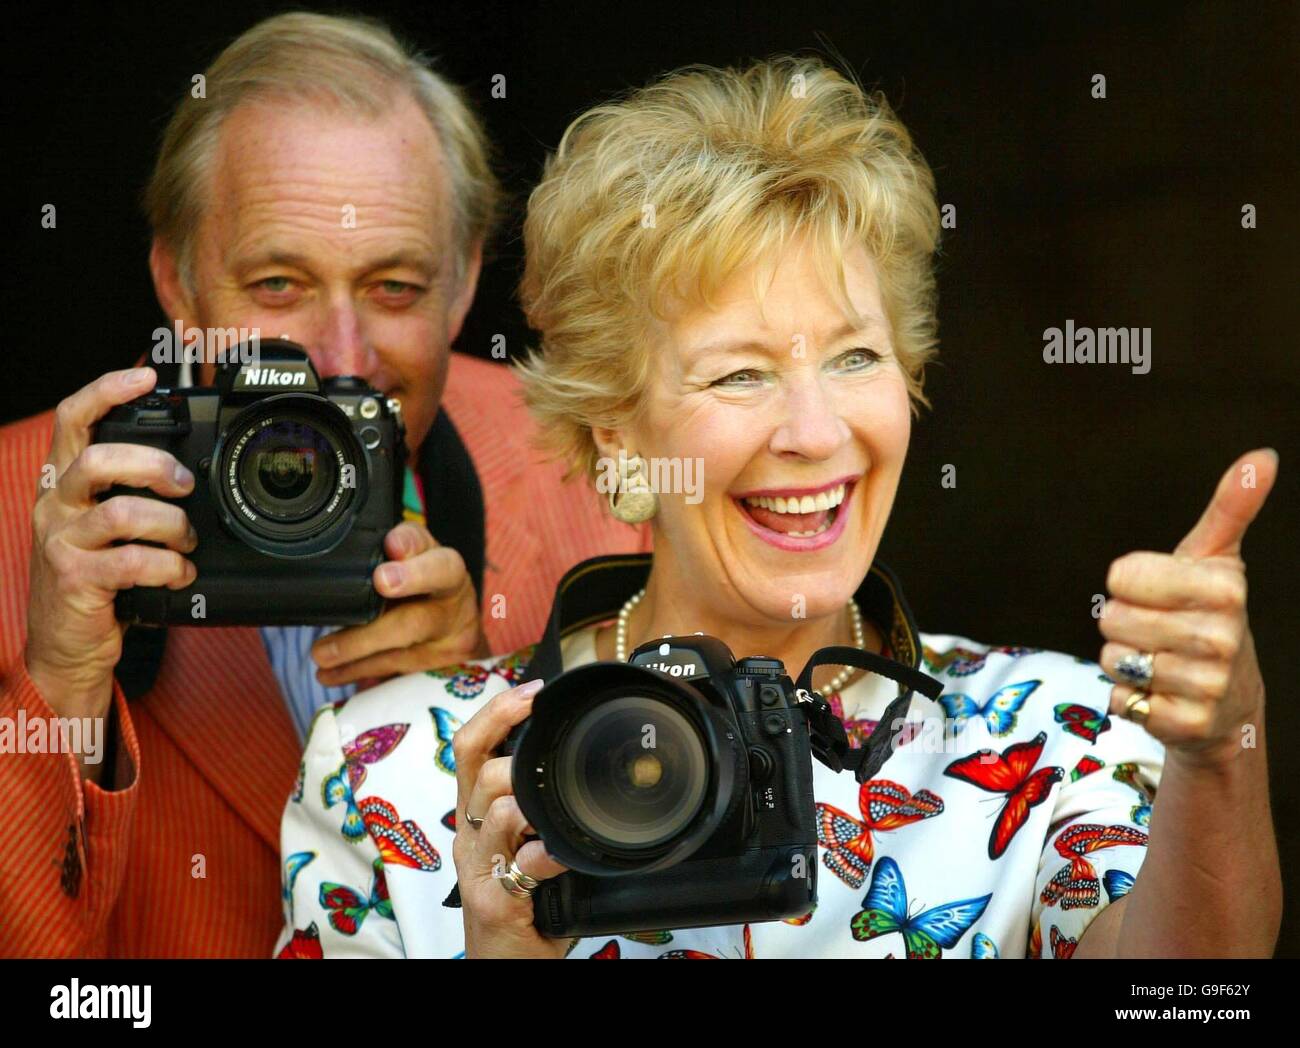 Neil and Christine Hamilton launch festival photography competition Stock Photo